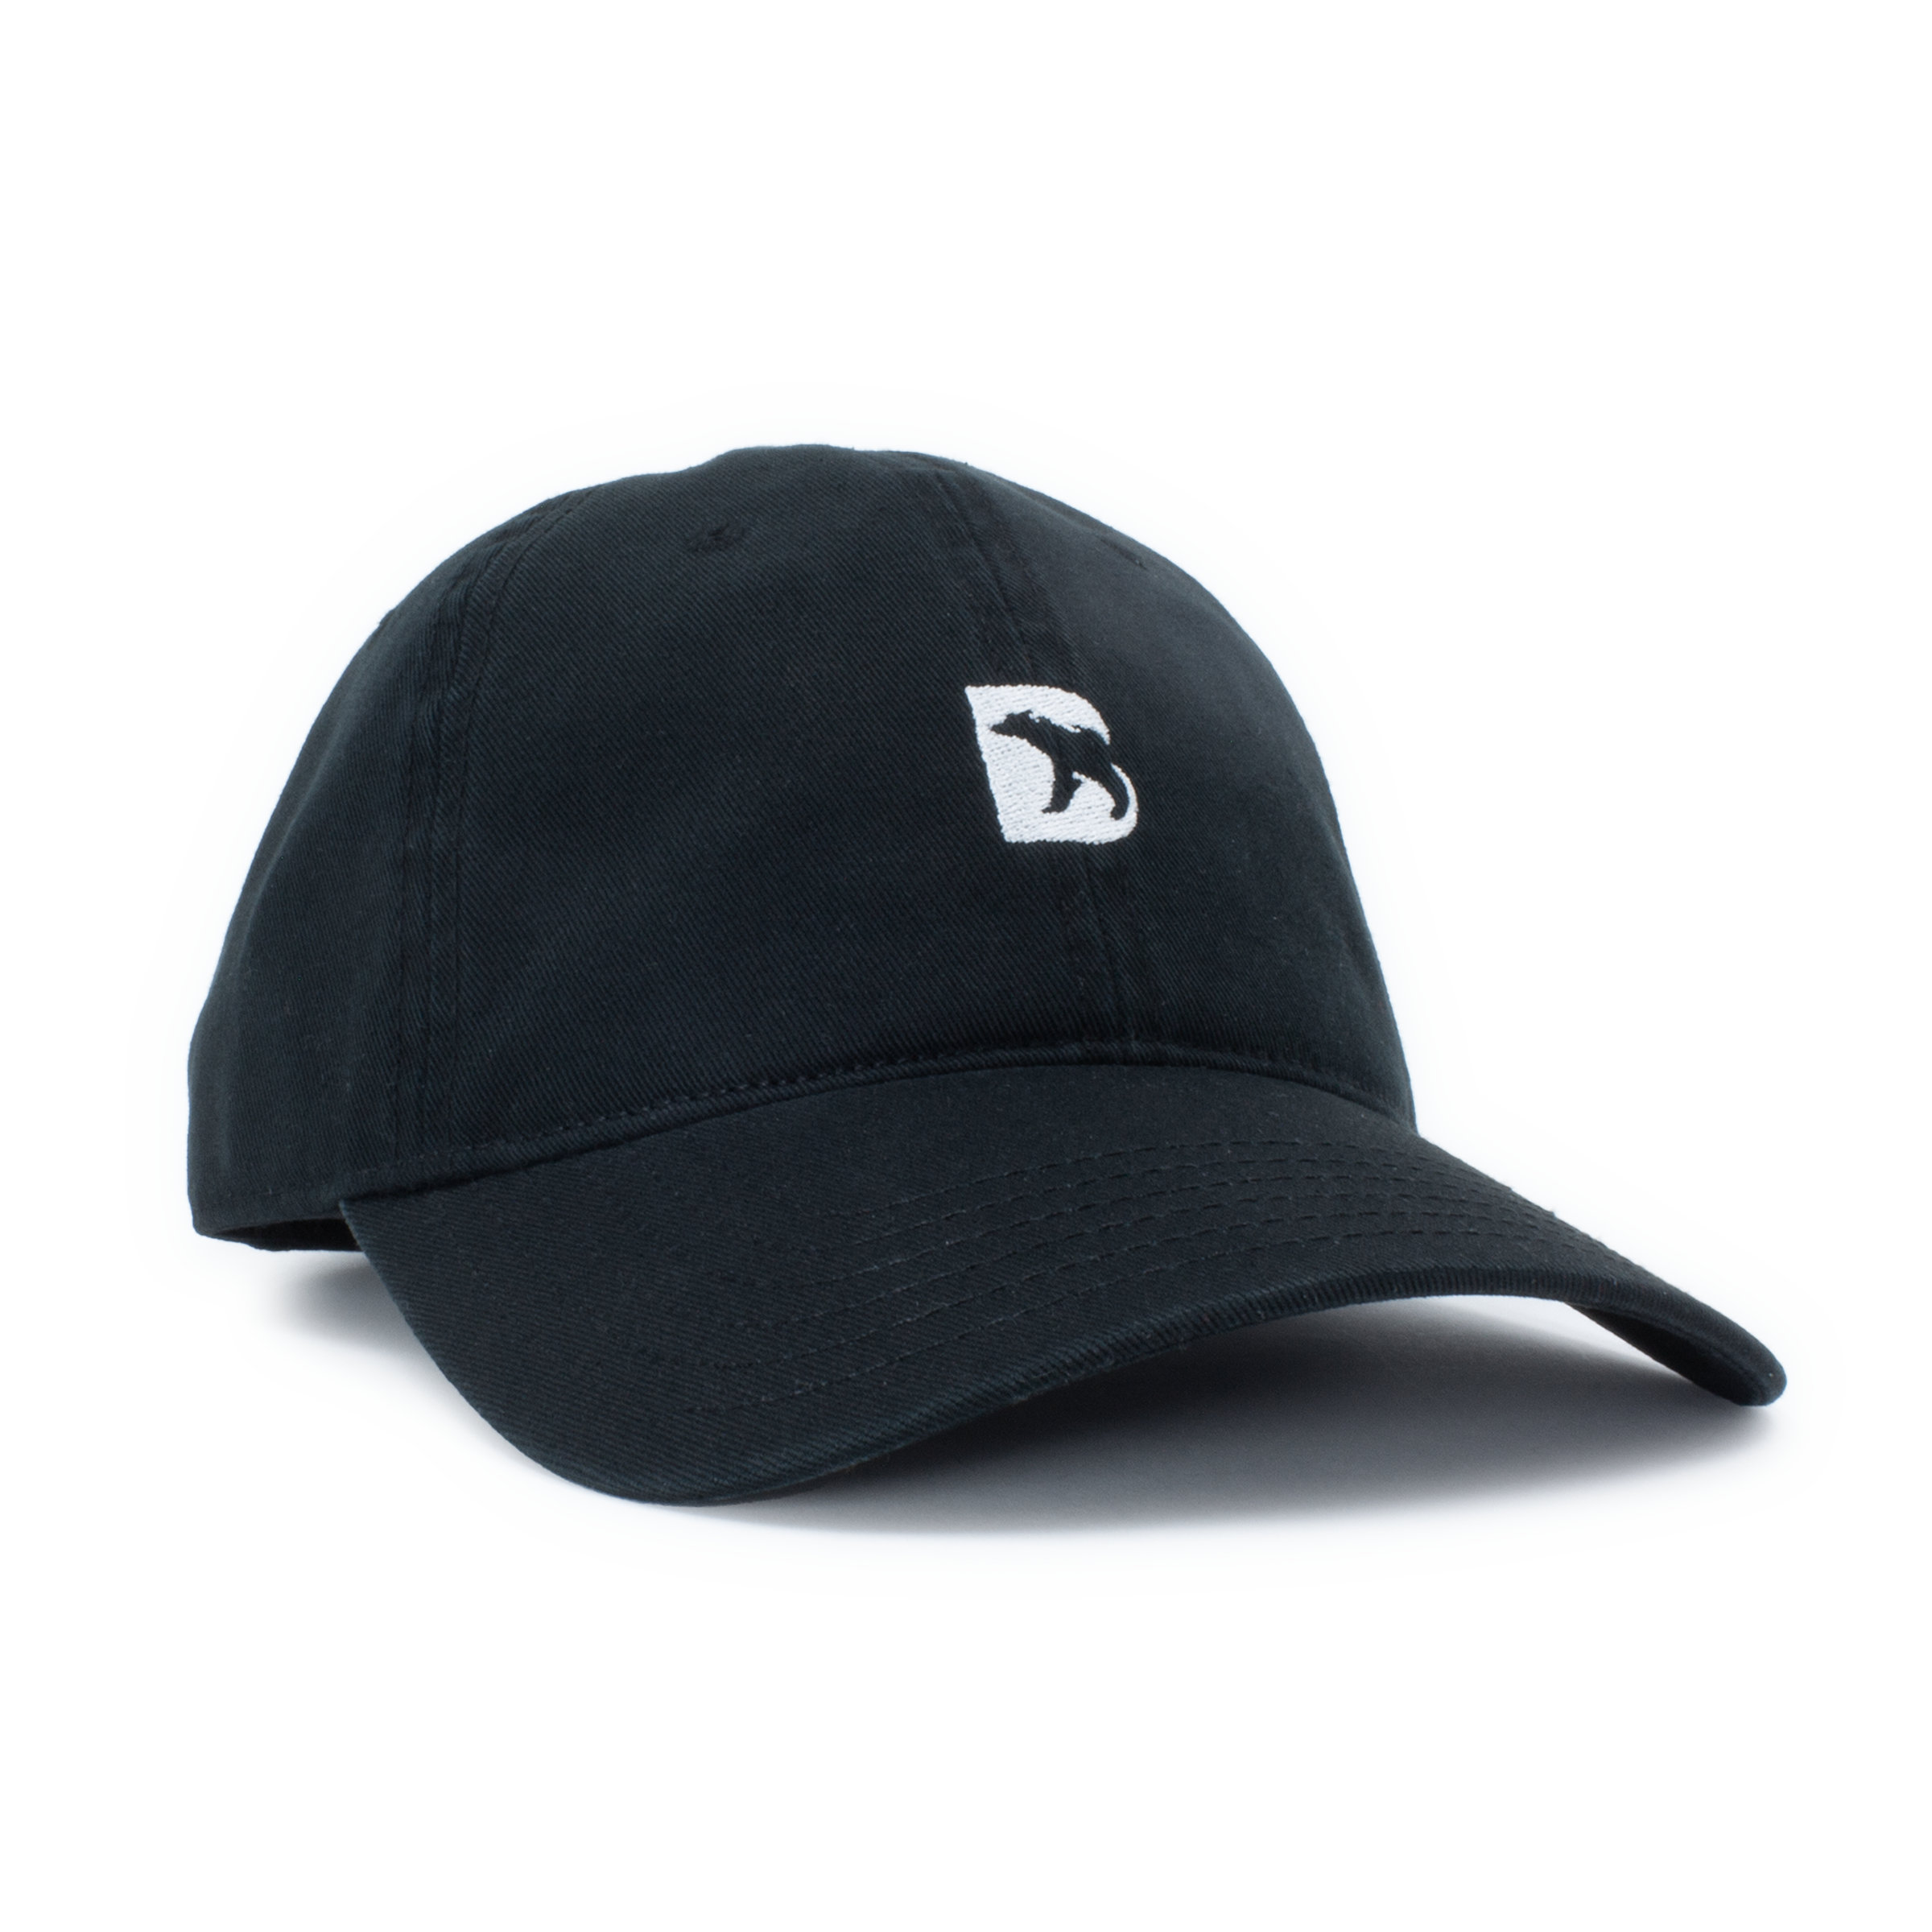 Bearbottom Dad Hat Black front right